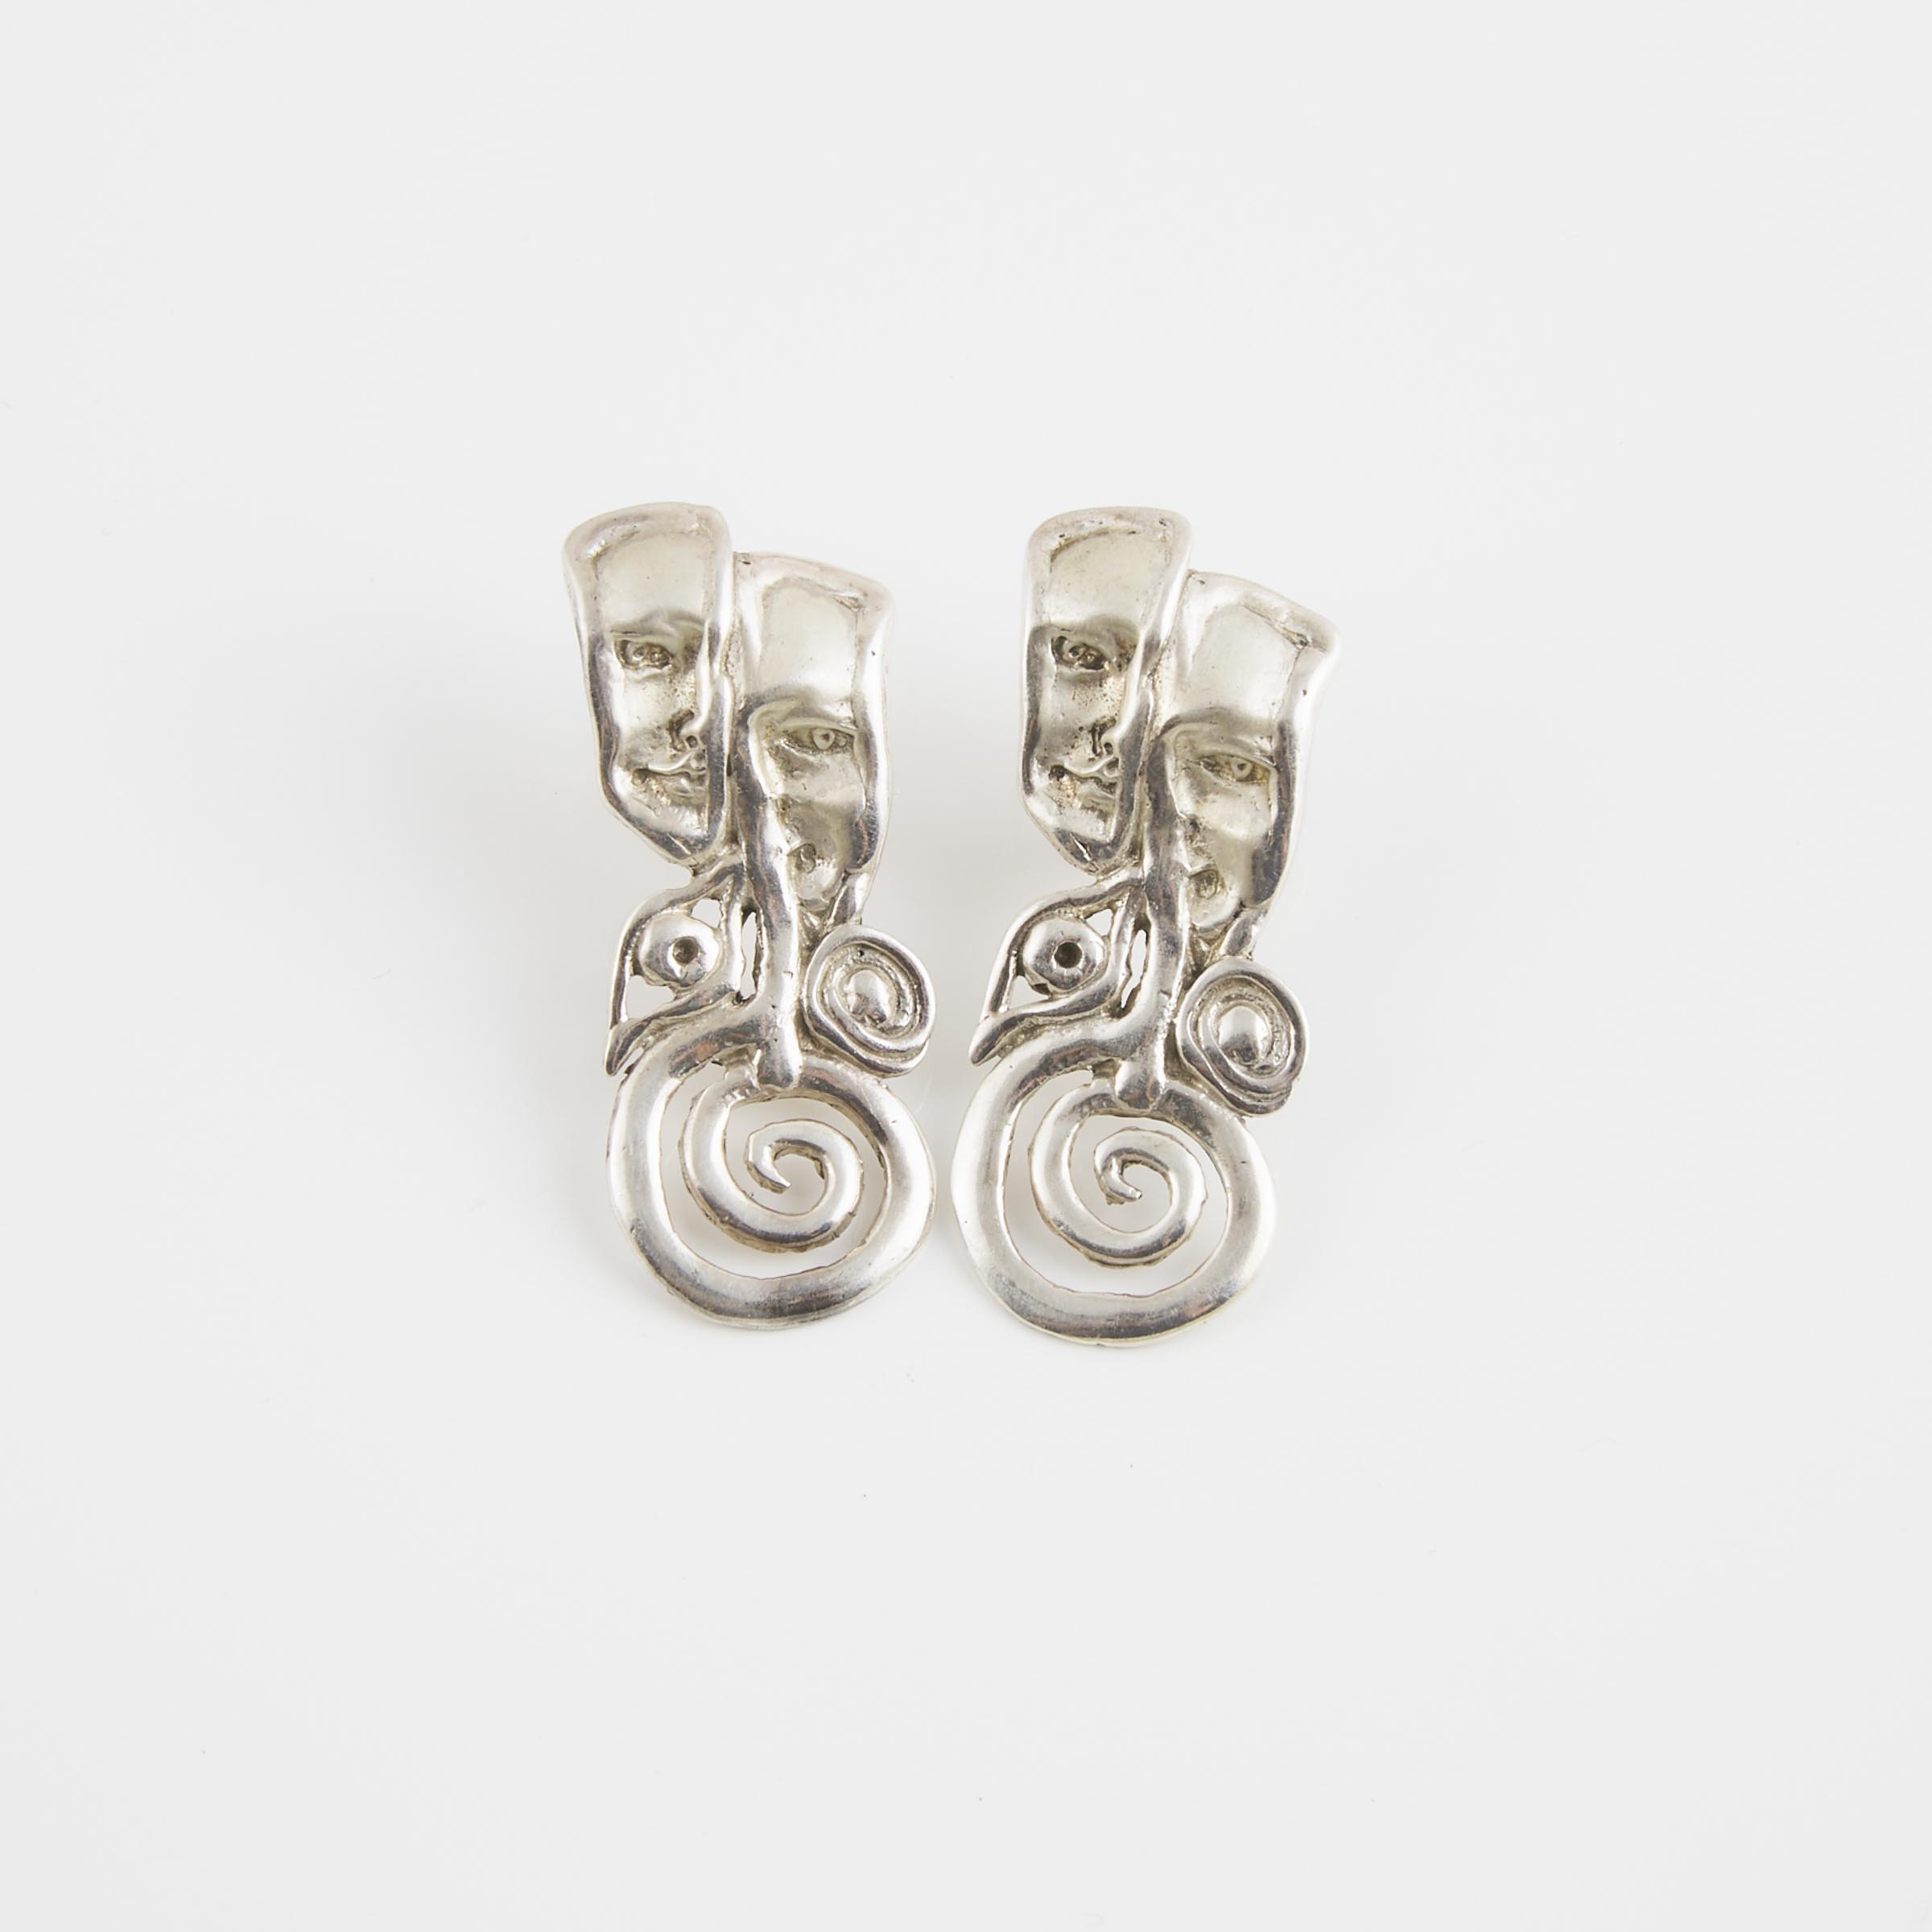 Pair Of Mexican Sterling Silver Earrings